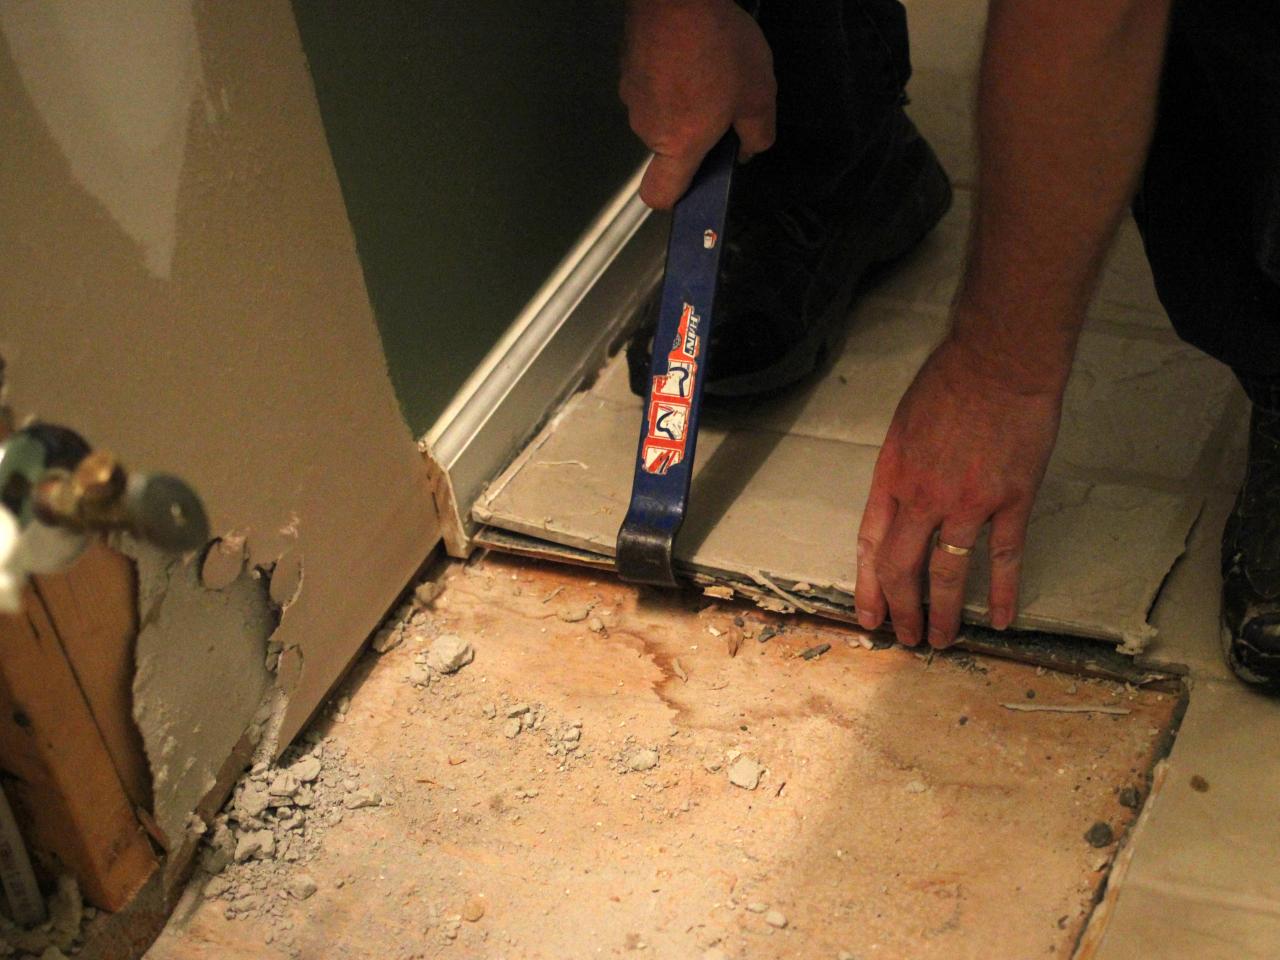 How To Remove A Tile Floor, Lifting Floor Tiles